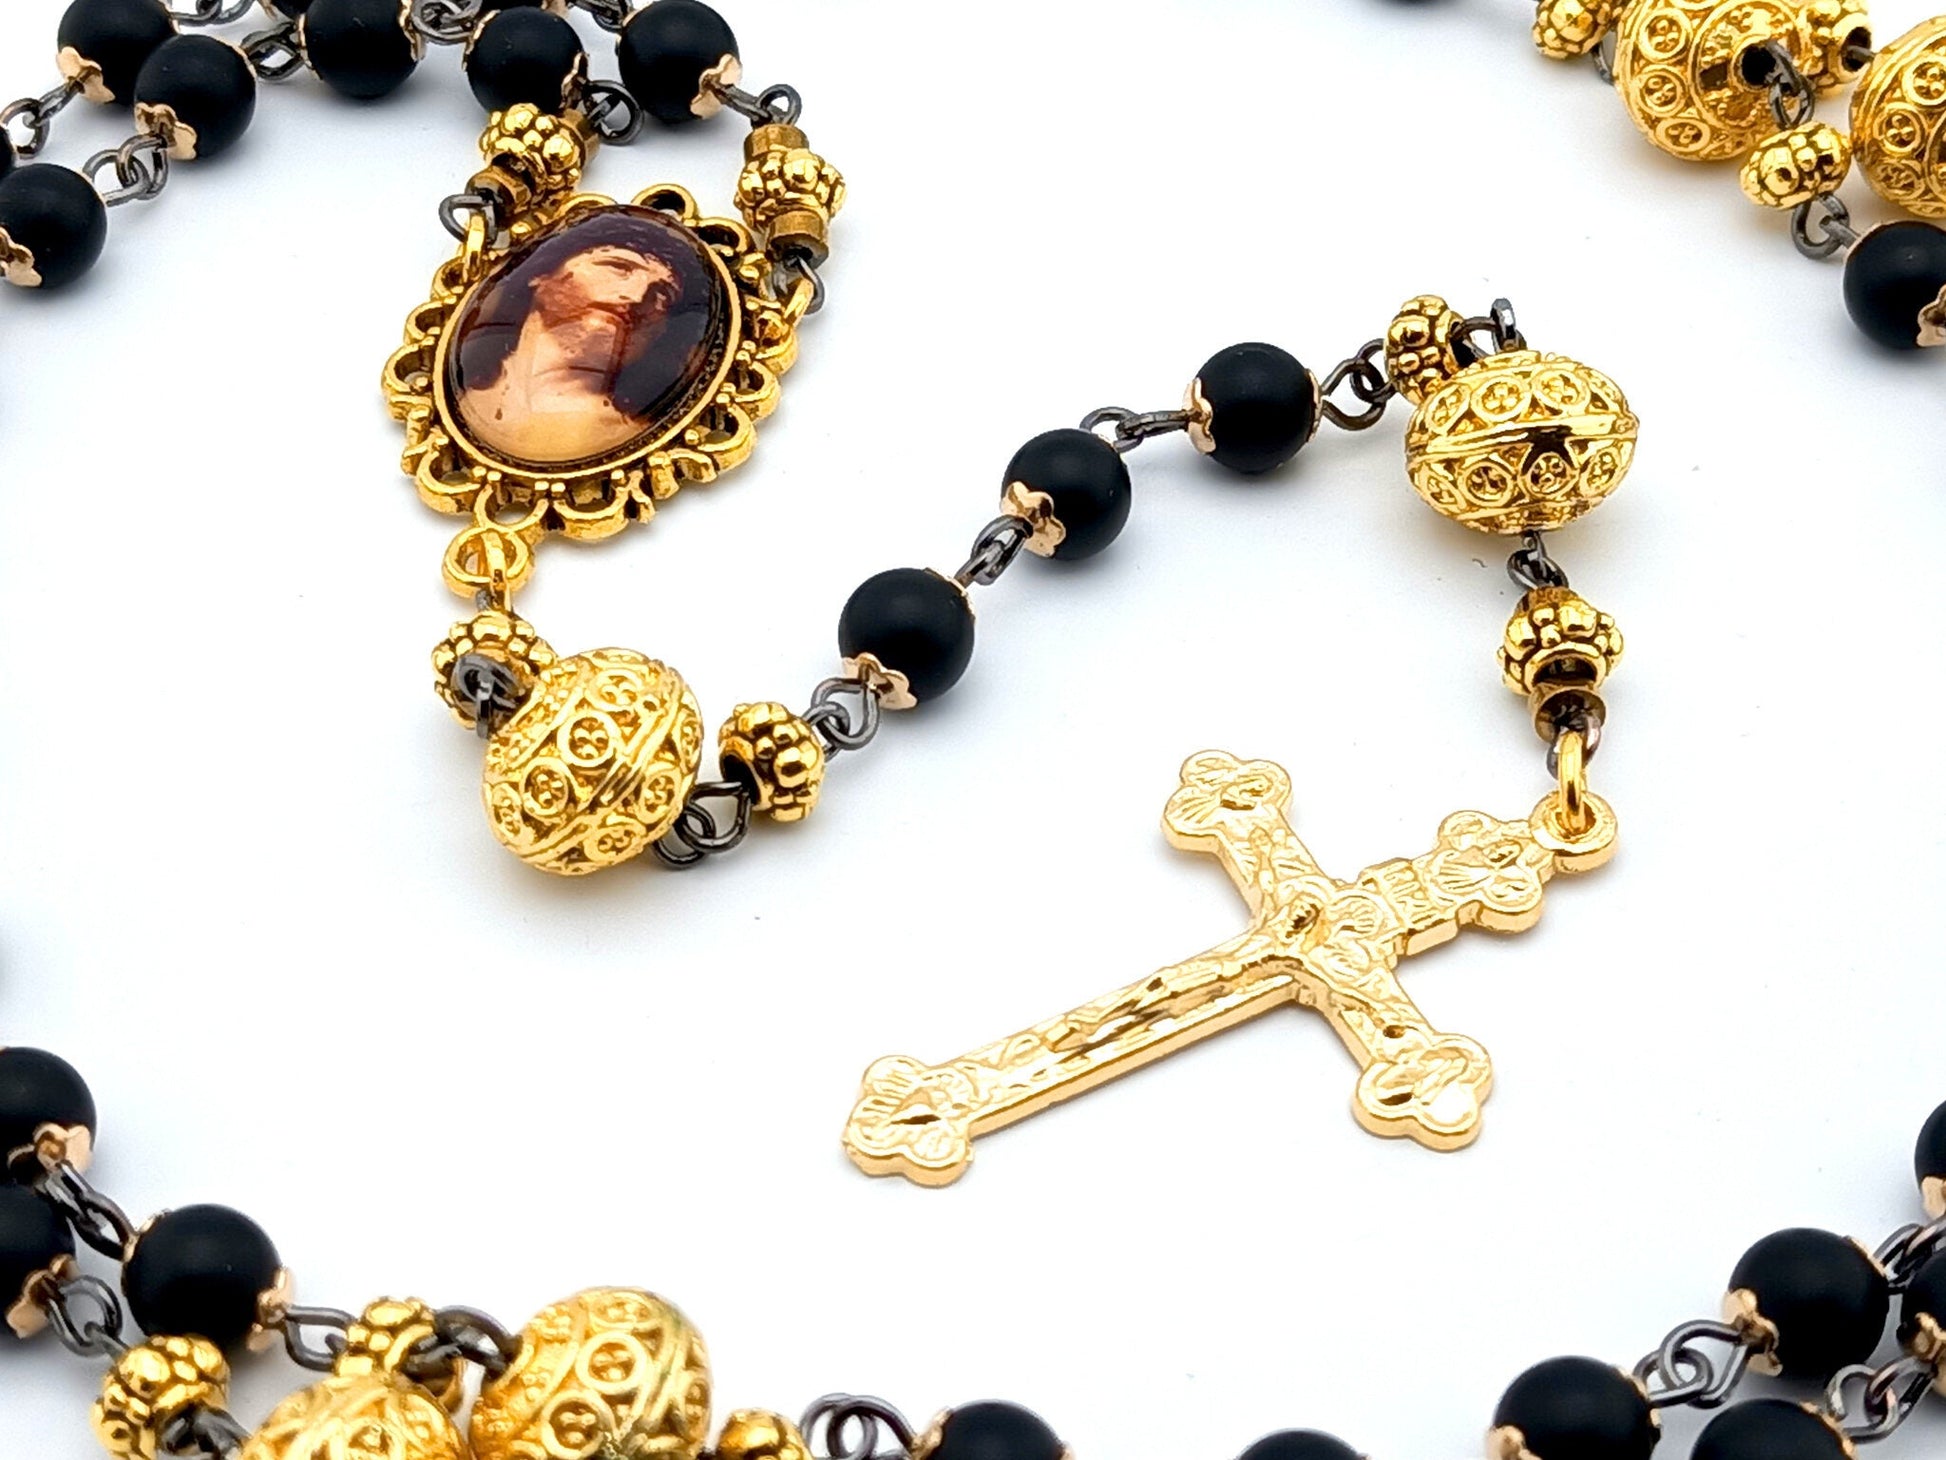 Crown of Thorns unique rosary beads with black onyx and gold beads, golden crucifix and picture centre medal.